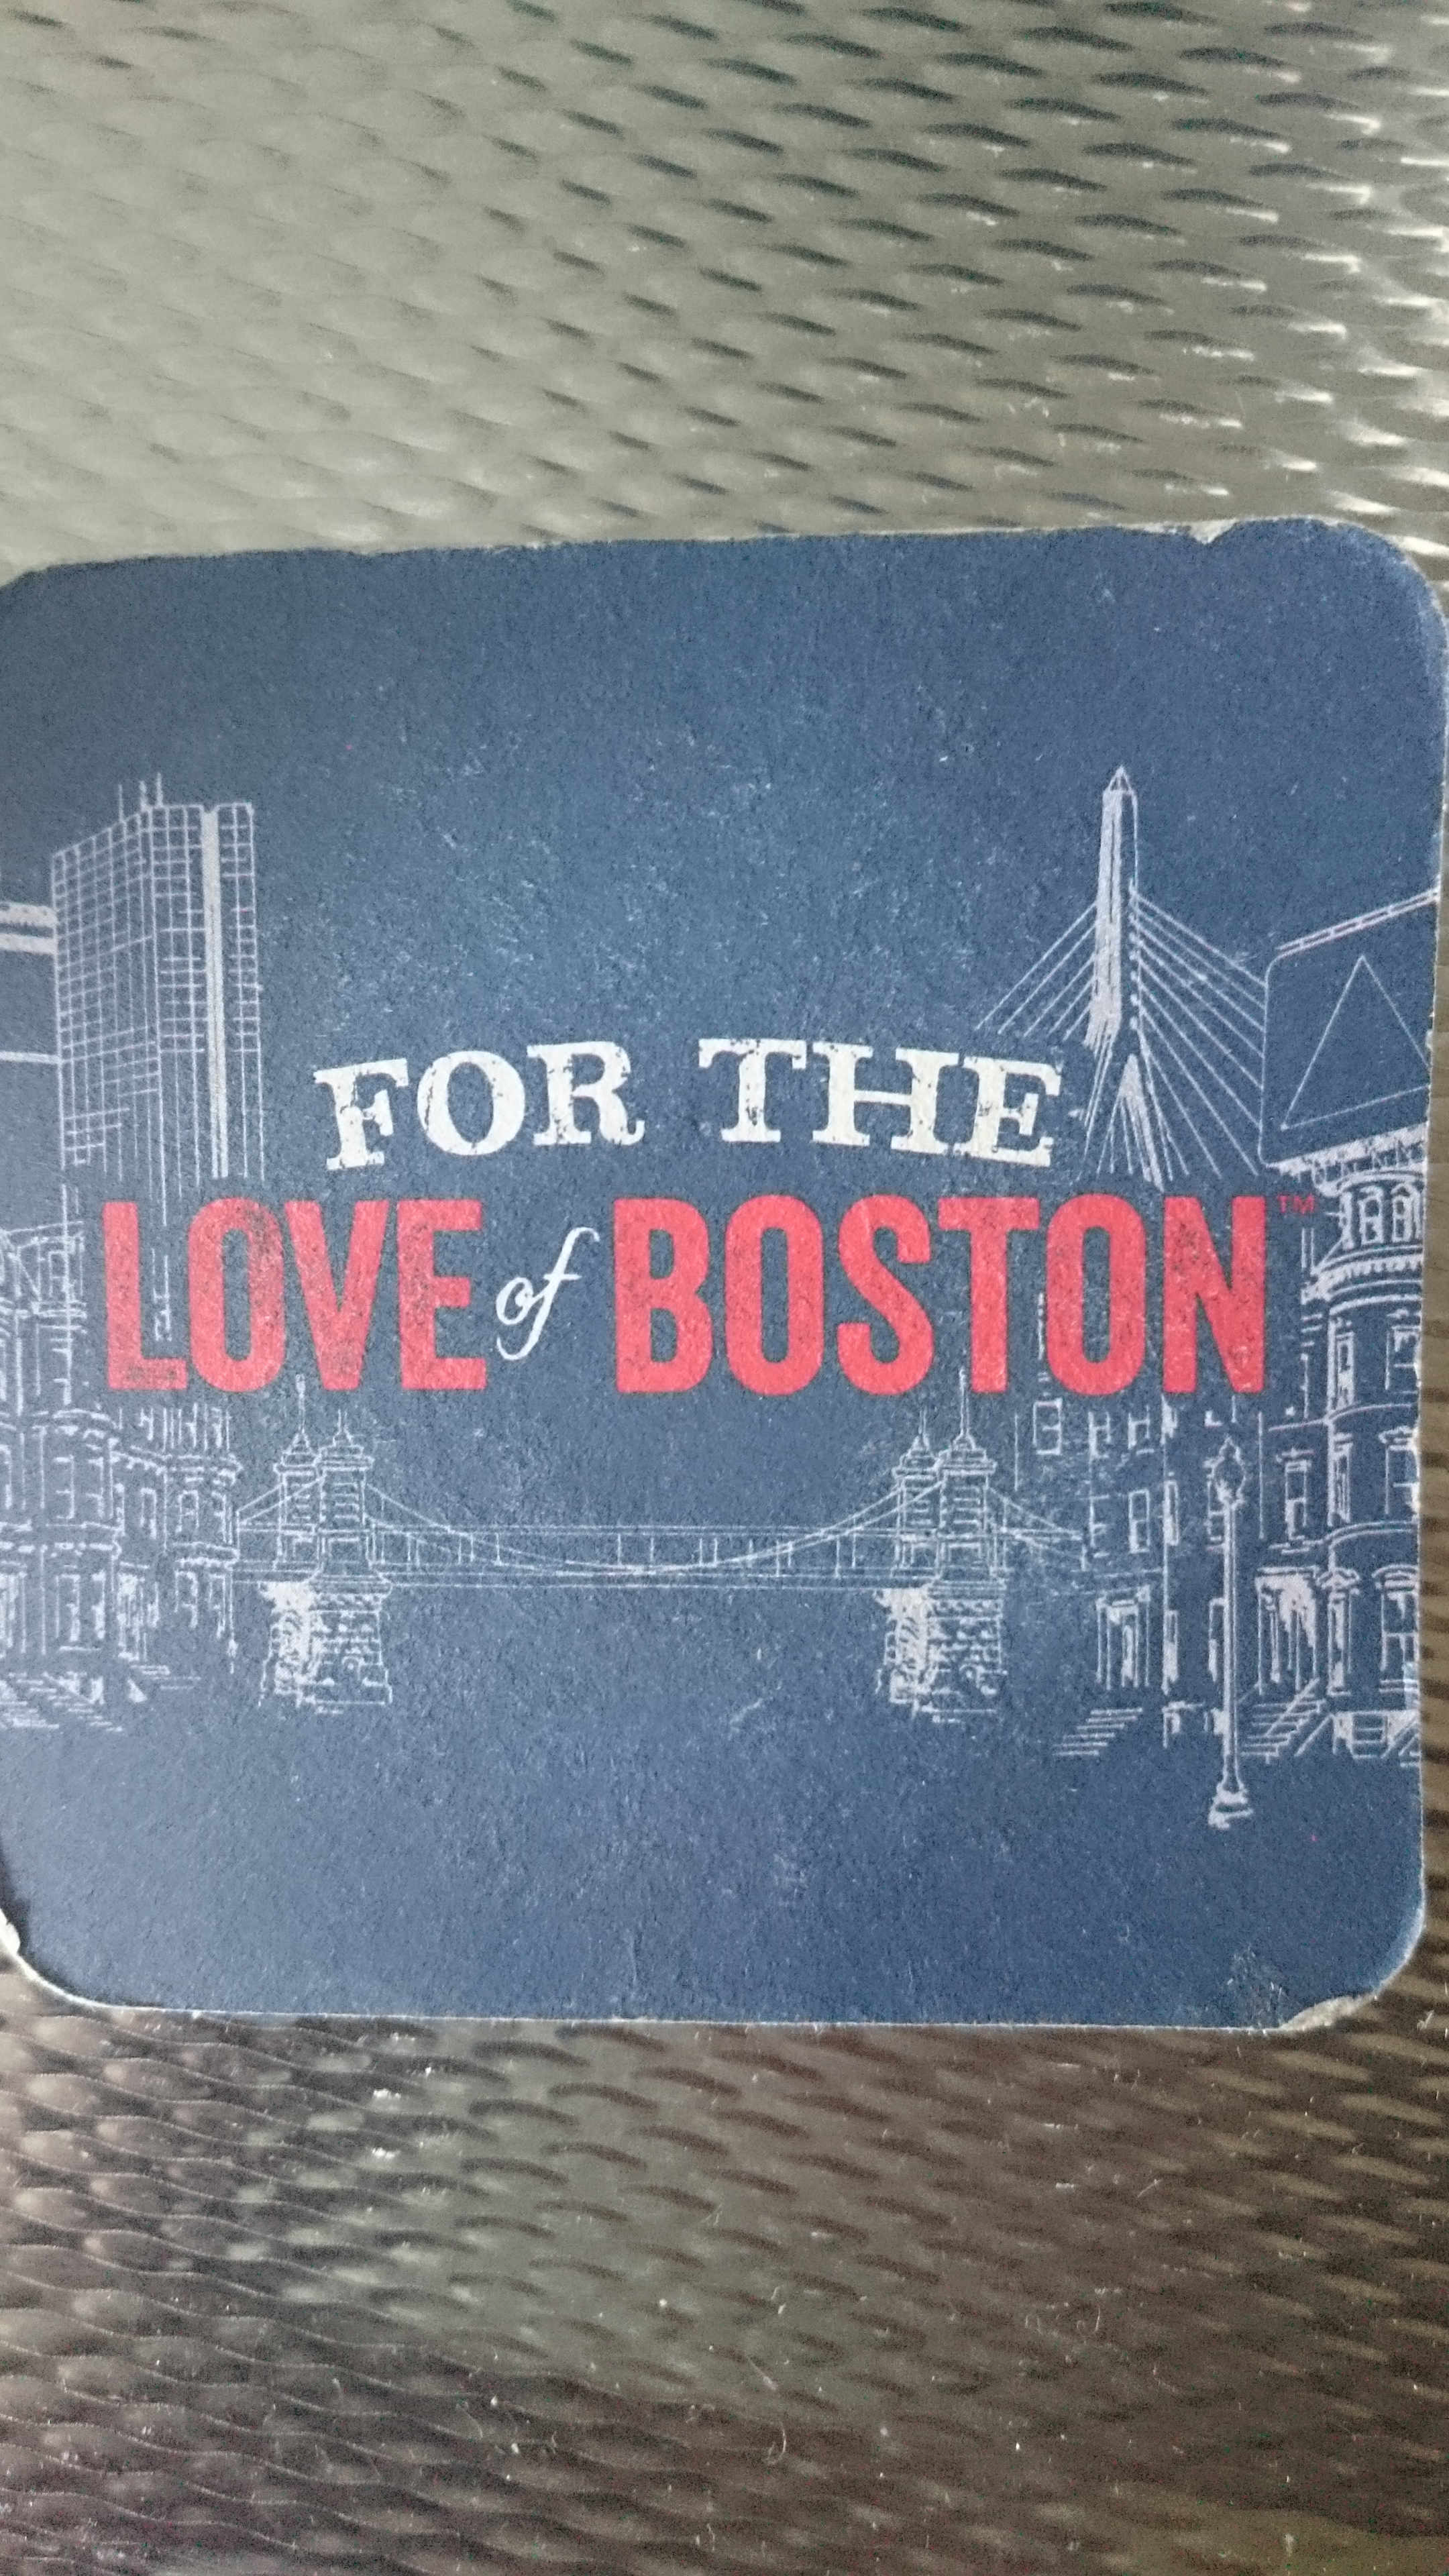 Samuel Adams beer coaster, showing their Boston roots. Photo: author